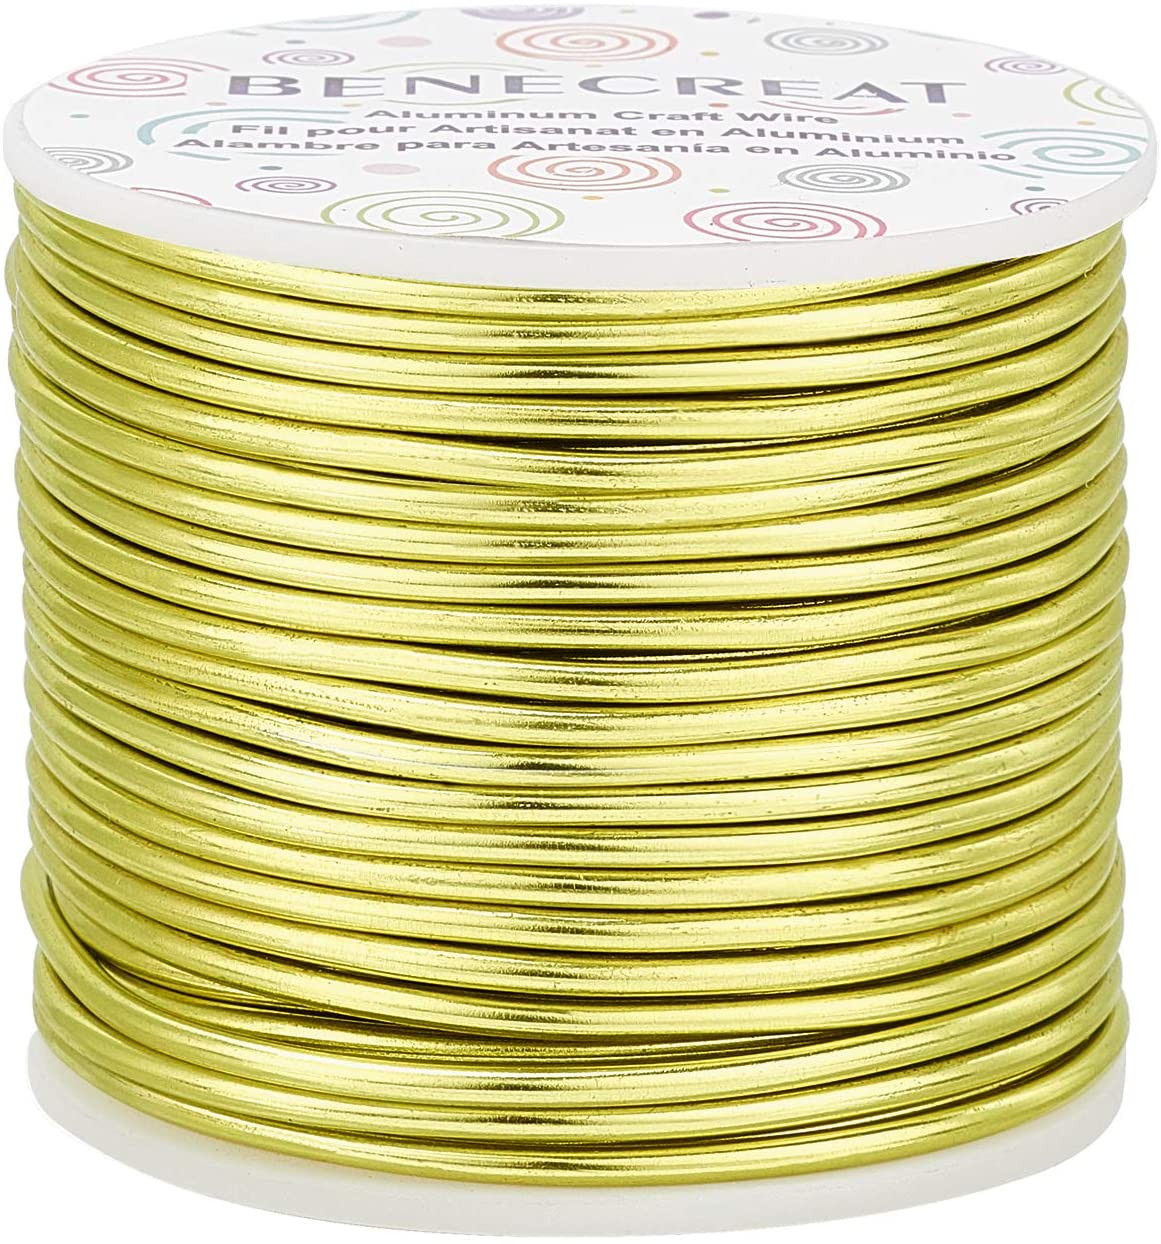 10 Gauge 80FT Tarnish Resistant Jewelry Craft Wire Bendable Aluminum  Sculpting Metal Wire for Jewelry Craft Beading Work Khaki